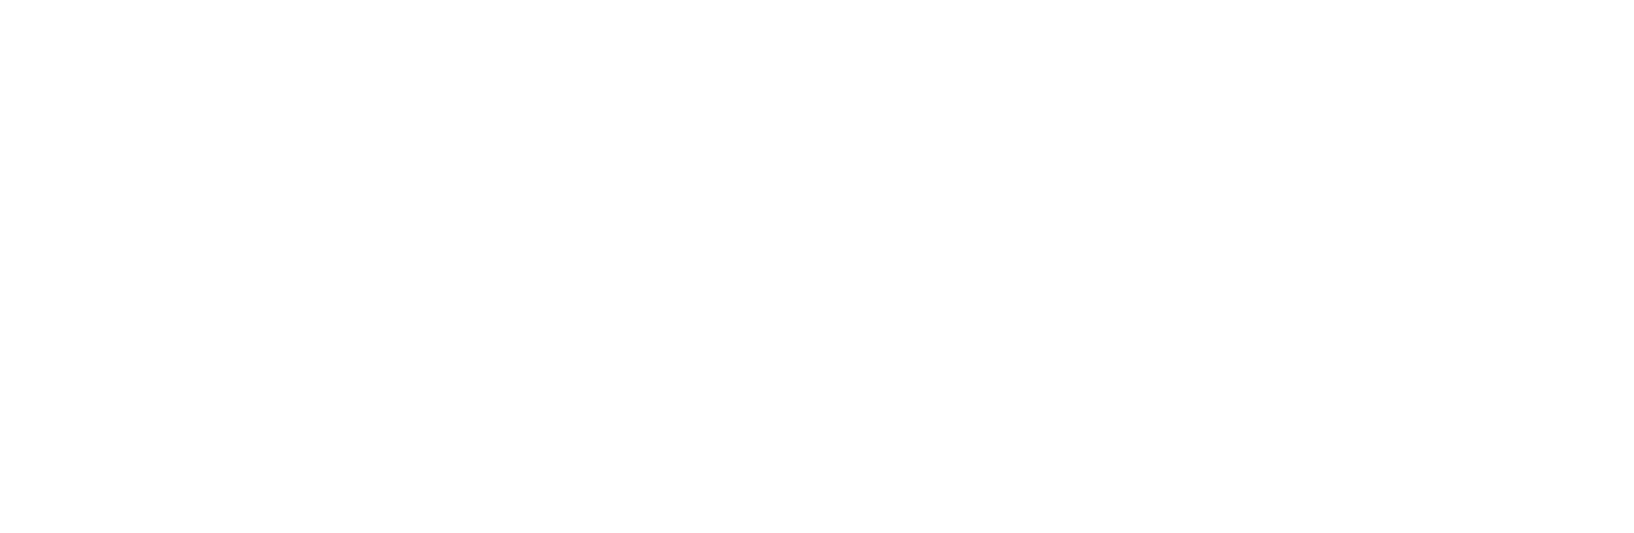 Haverford Square Properties